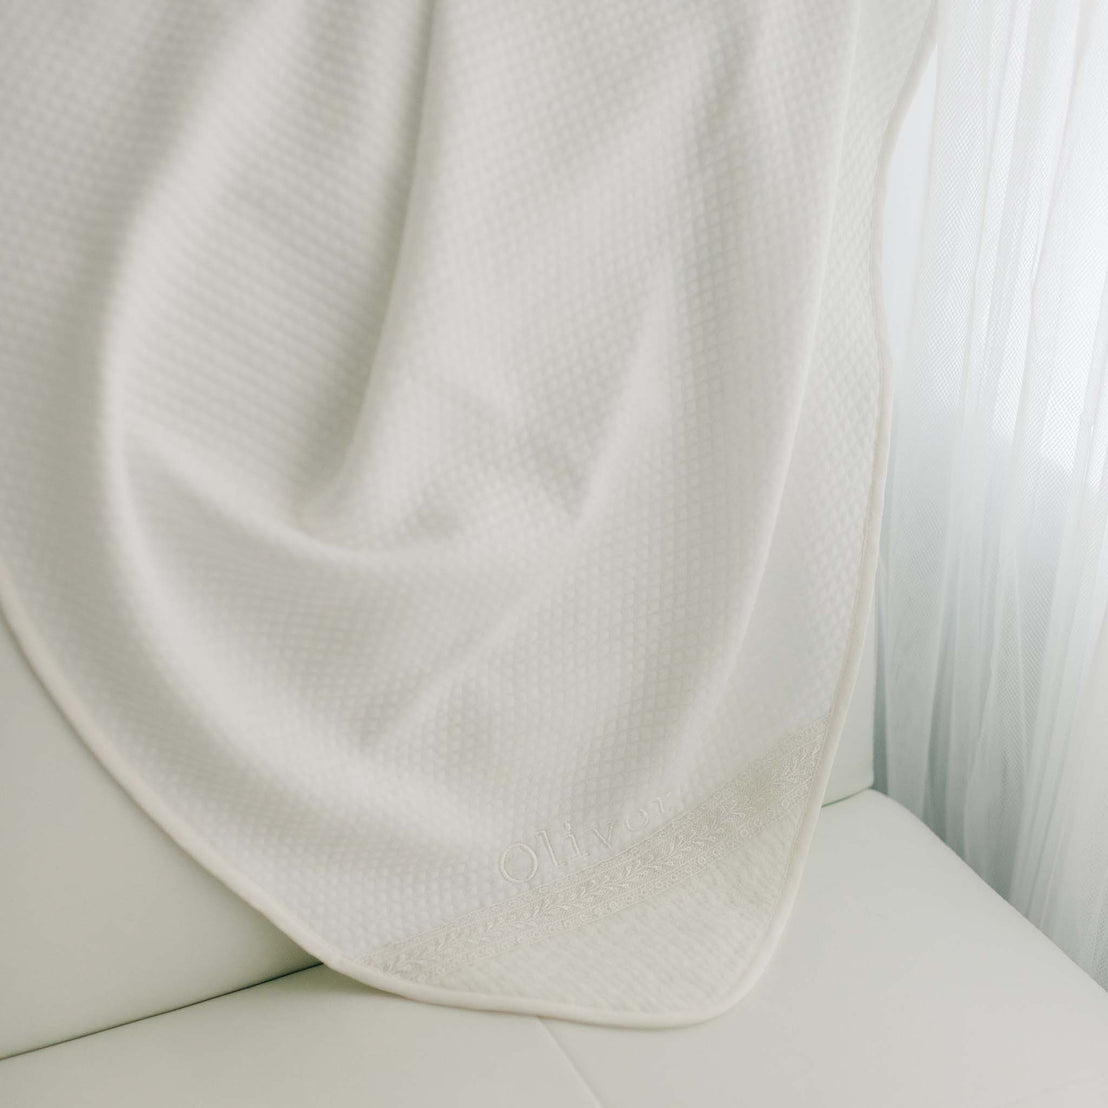 The ivory Oliver Personalized Blanket draped over the arm of a white leather sofa. The blanket is crafted from a textured pima cotton with the name "Oliver" embroidered in ivory thread on the corner of the blanket.